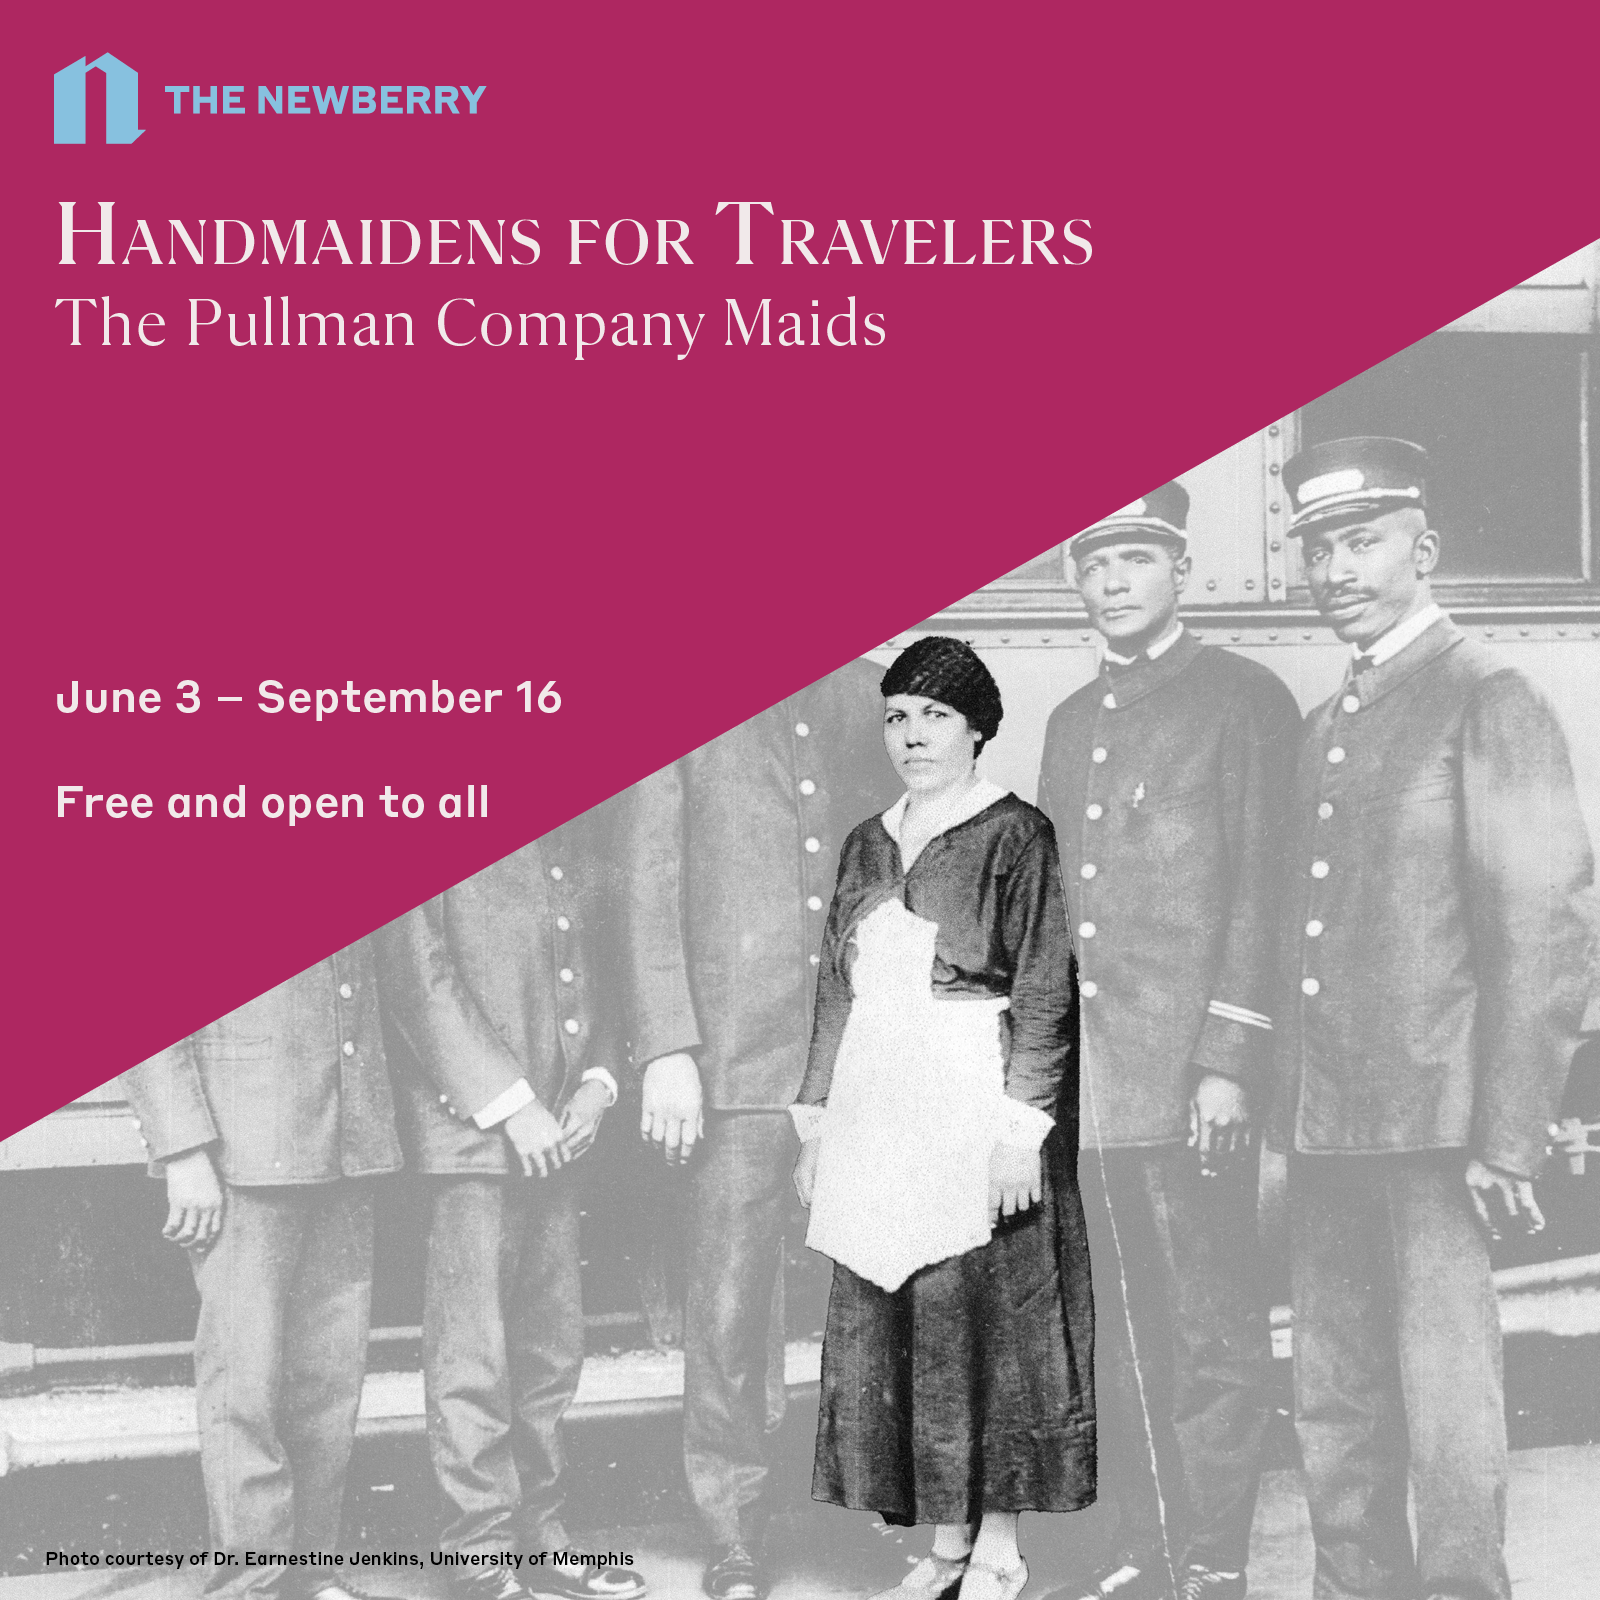 Handmaidens for Travelers: The Pullman Company Maids